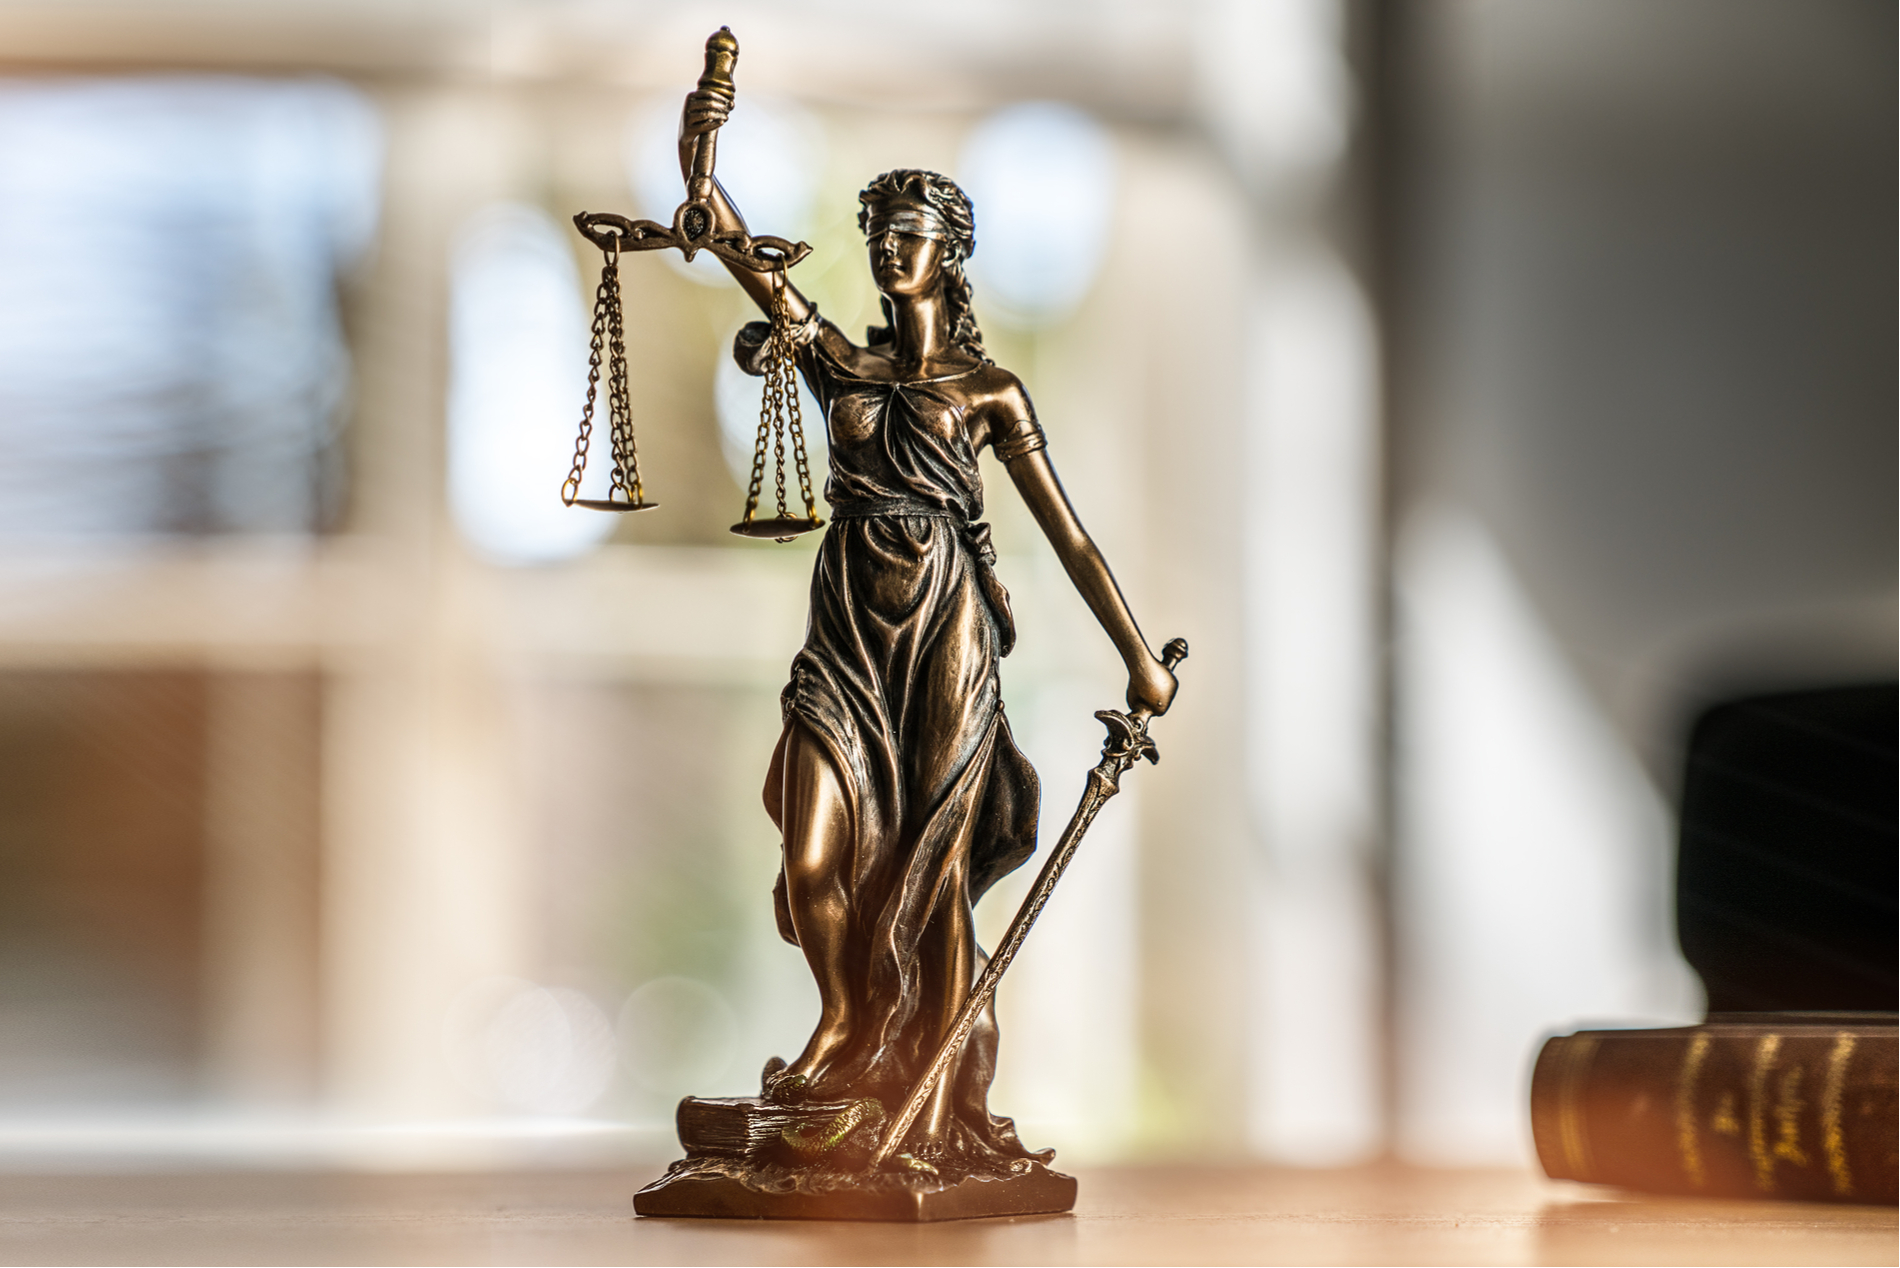 Crypto Capital Principal Indicted On Fraud, Confirming Bitfinex Allegations